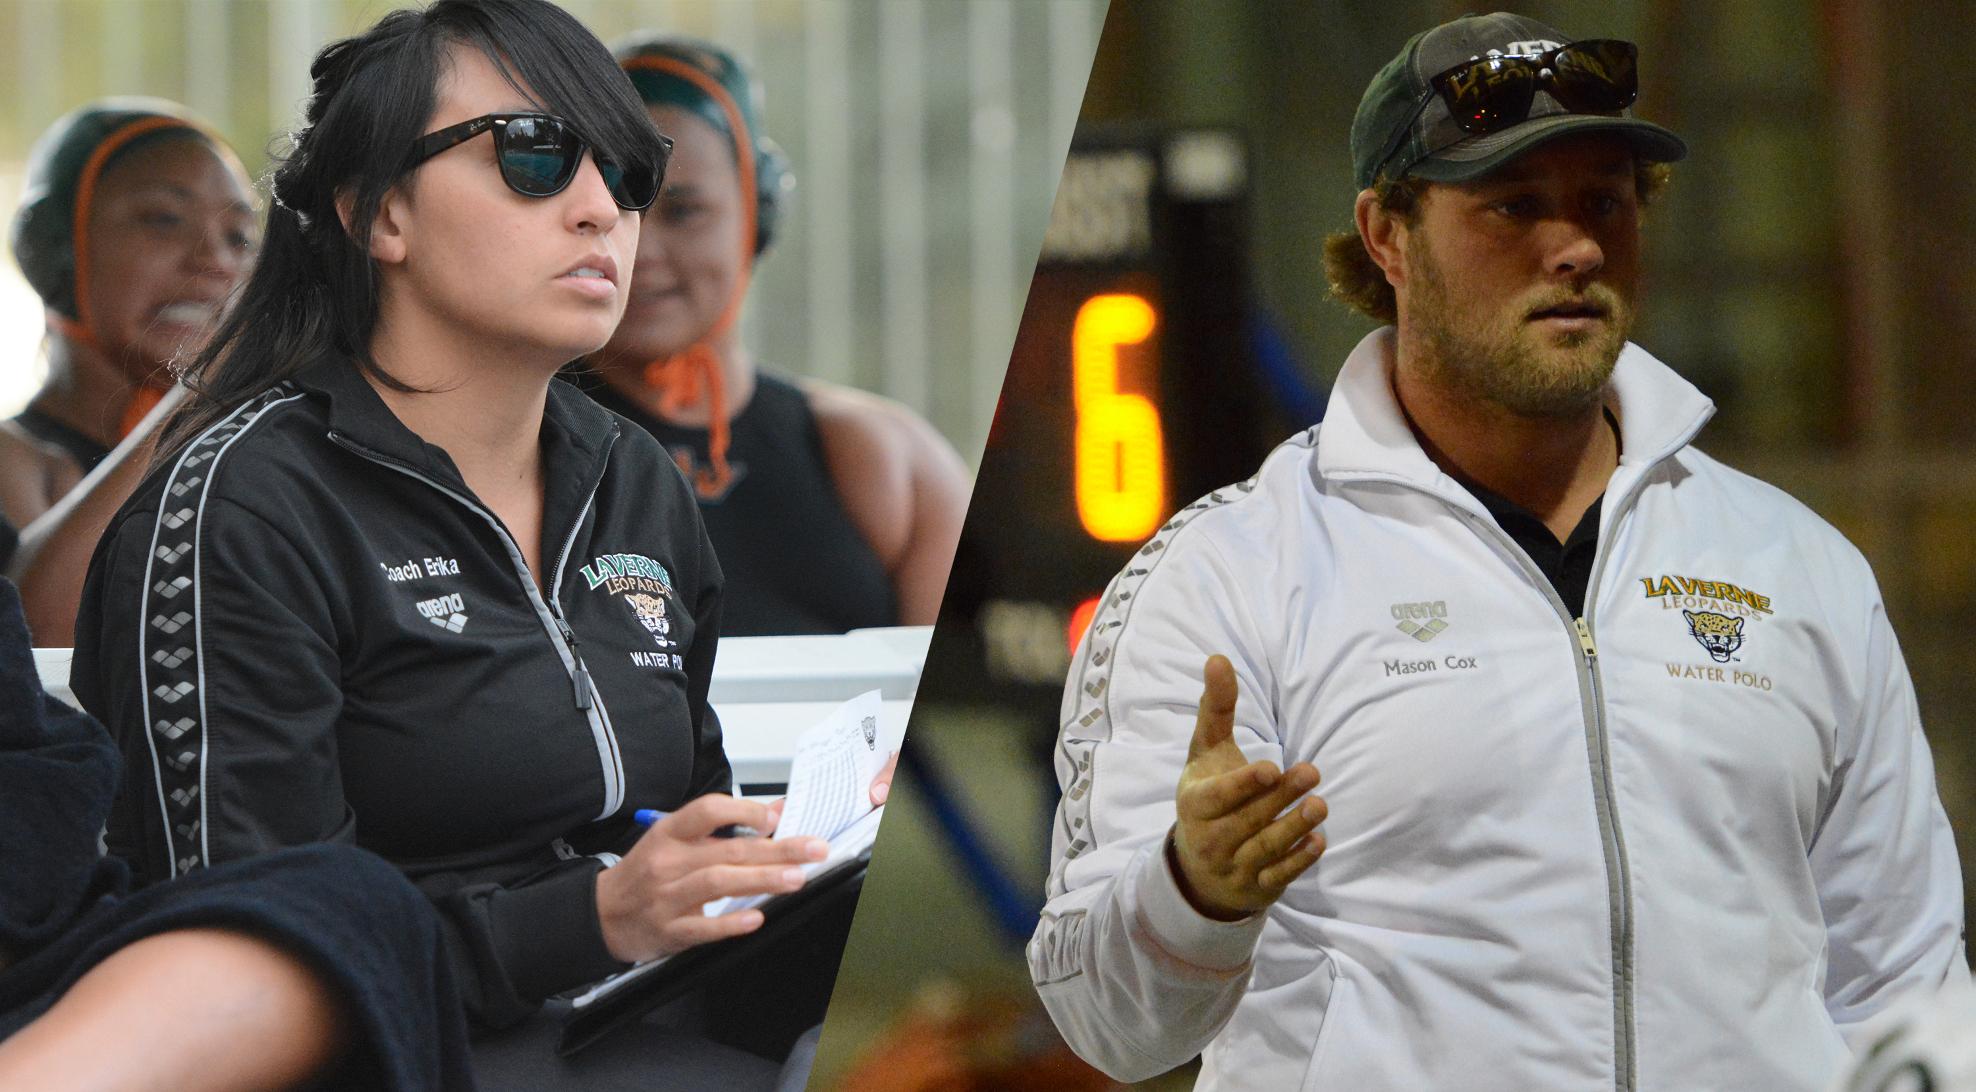 Cox, Vargas tabbed to lead water polo programs in 2016-17